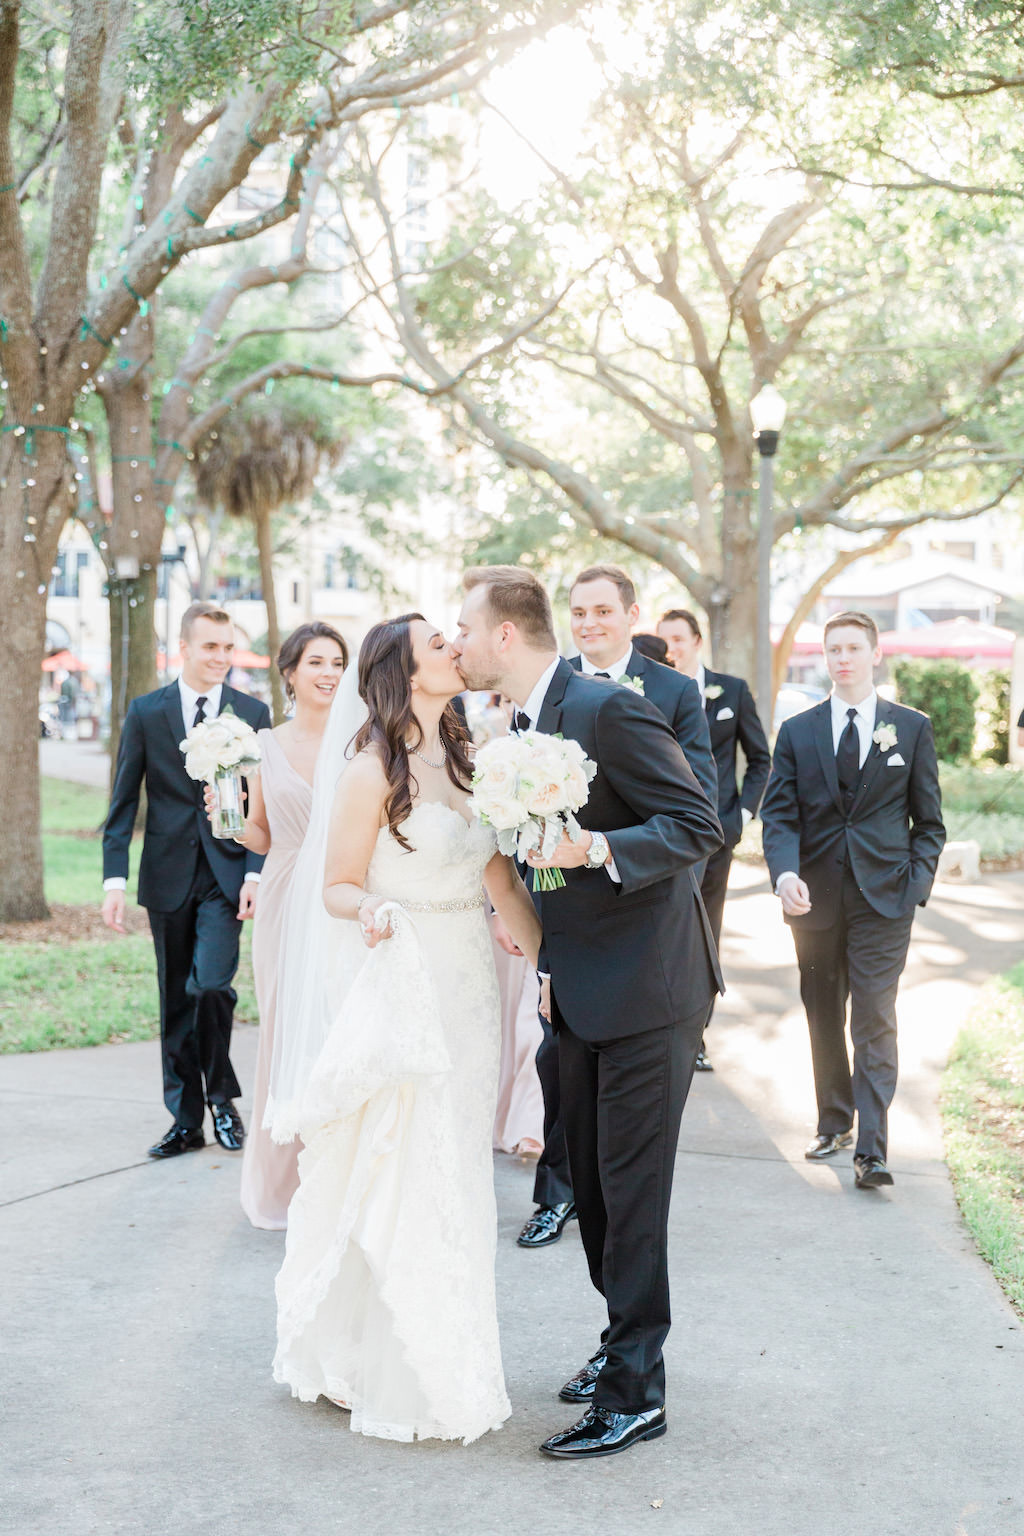 Downtown St. Pete Straub Park Wedding Party Portrait, Bride in Strapless Belted Column Dress, Groom and Groomsmen in Black Suits with White Floral Boutonniere, with White Rose Bouquet, Bridesmaids in Taupe | St Petersburg Wedding Florist Cotton and Magnolia